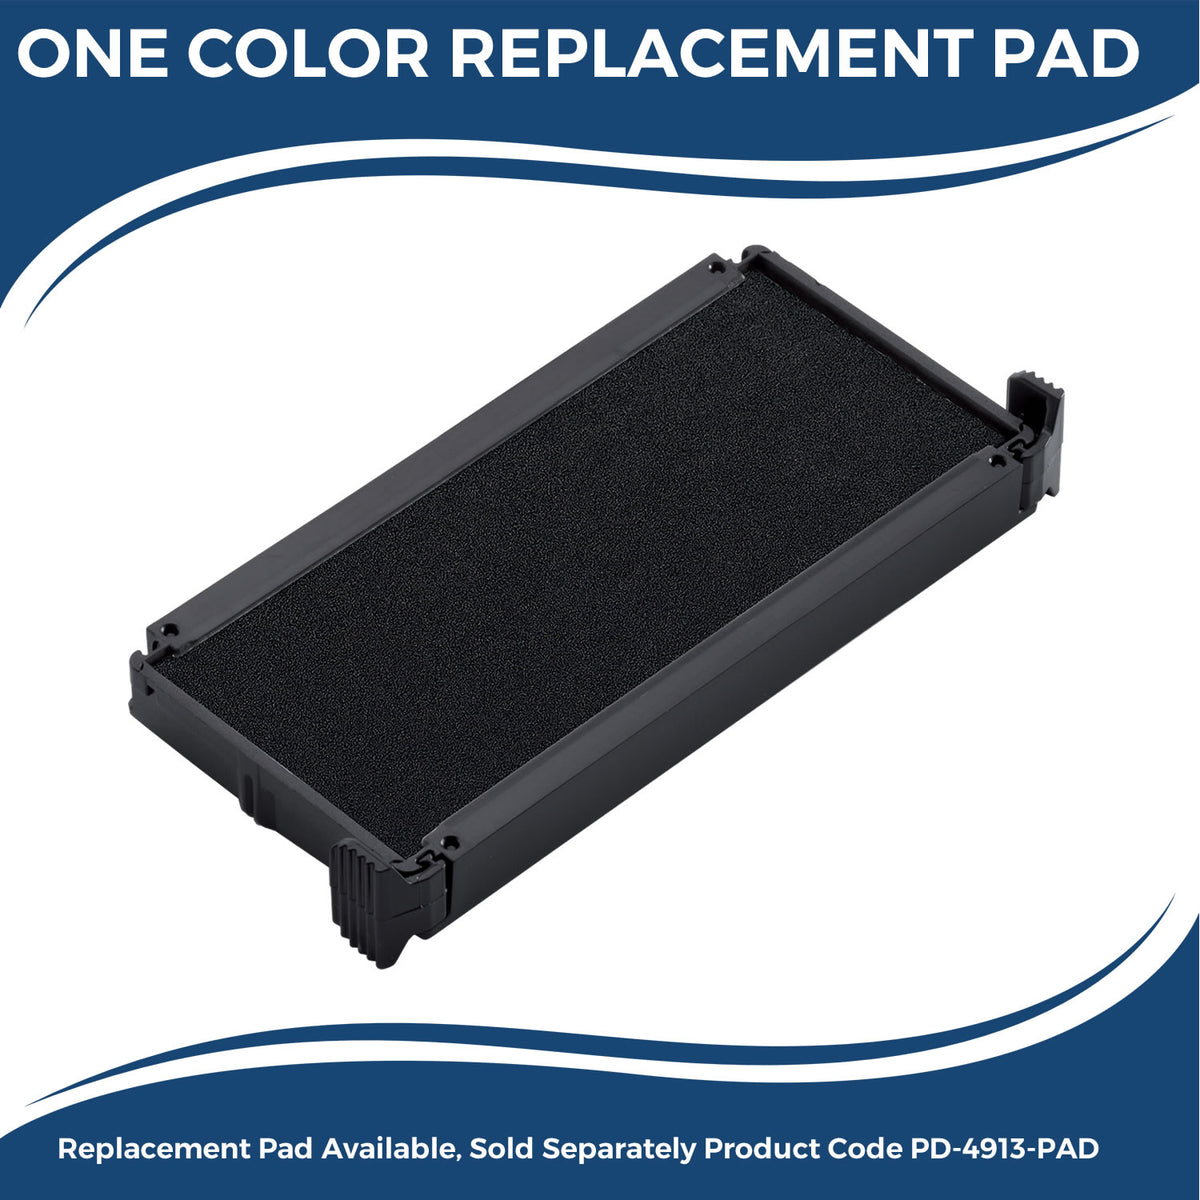 Large Self-Inking Covid-19 Patient Stamp 5510S Large Replacment Pad